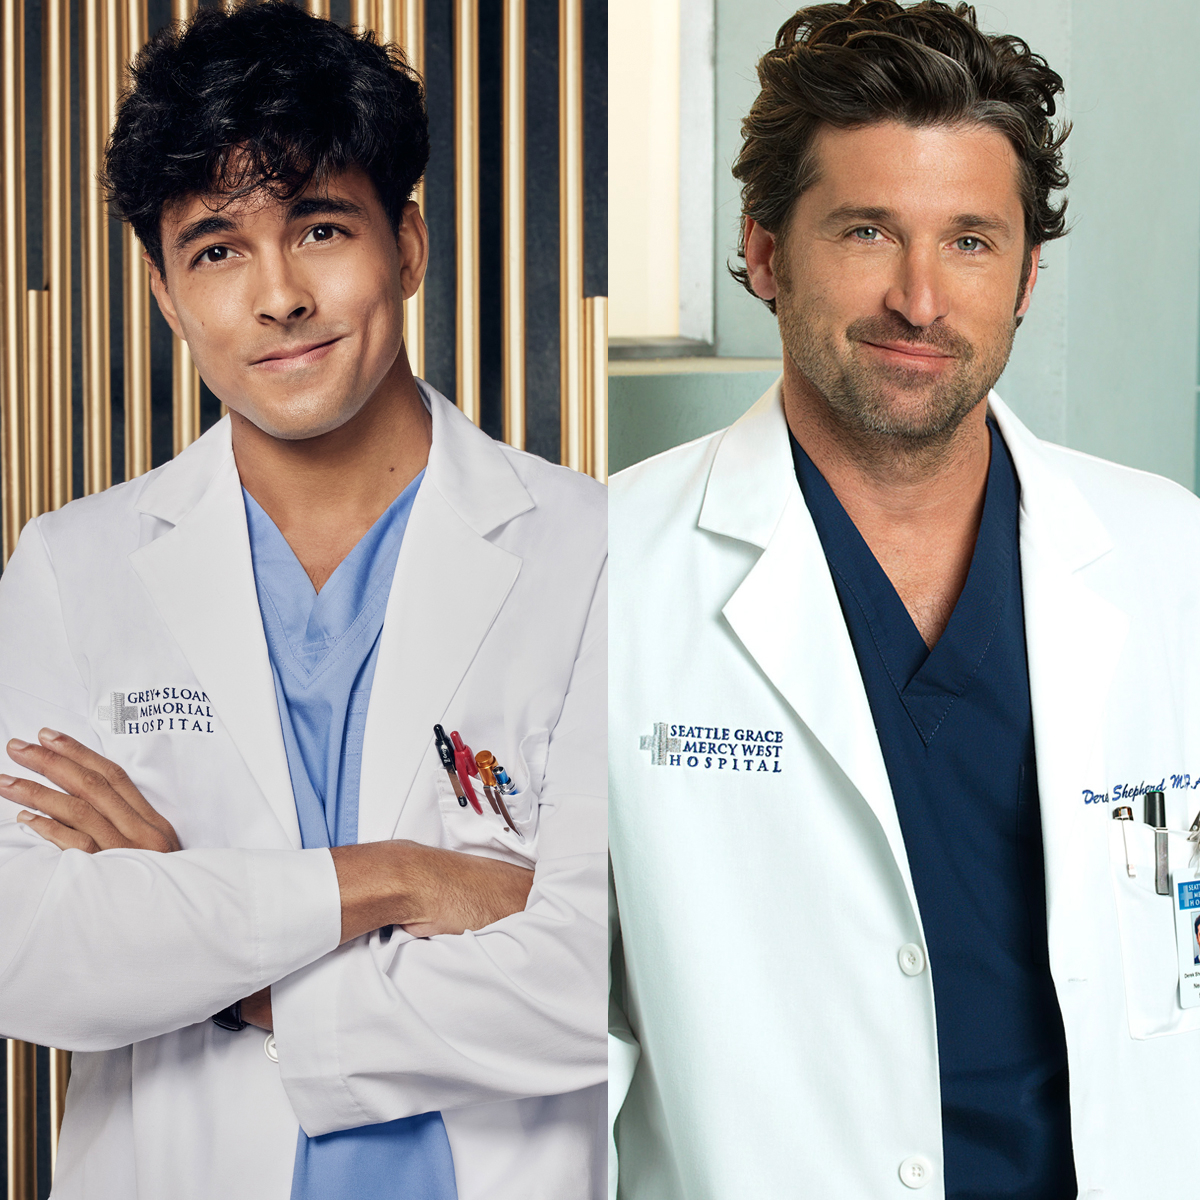 https://akns-images.eonline.com/eol_images/Entire_Site/202297/rs_1200x1200-221007095621-1200-lucas-derek-greys-anatomy.jpg?fit=around%7C1200:1200&output-quality=90&crop=1200:1200;center,top